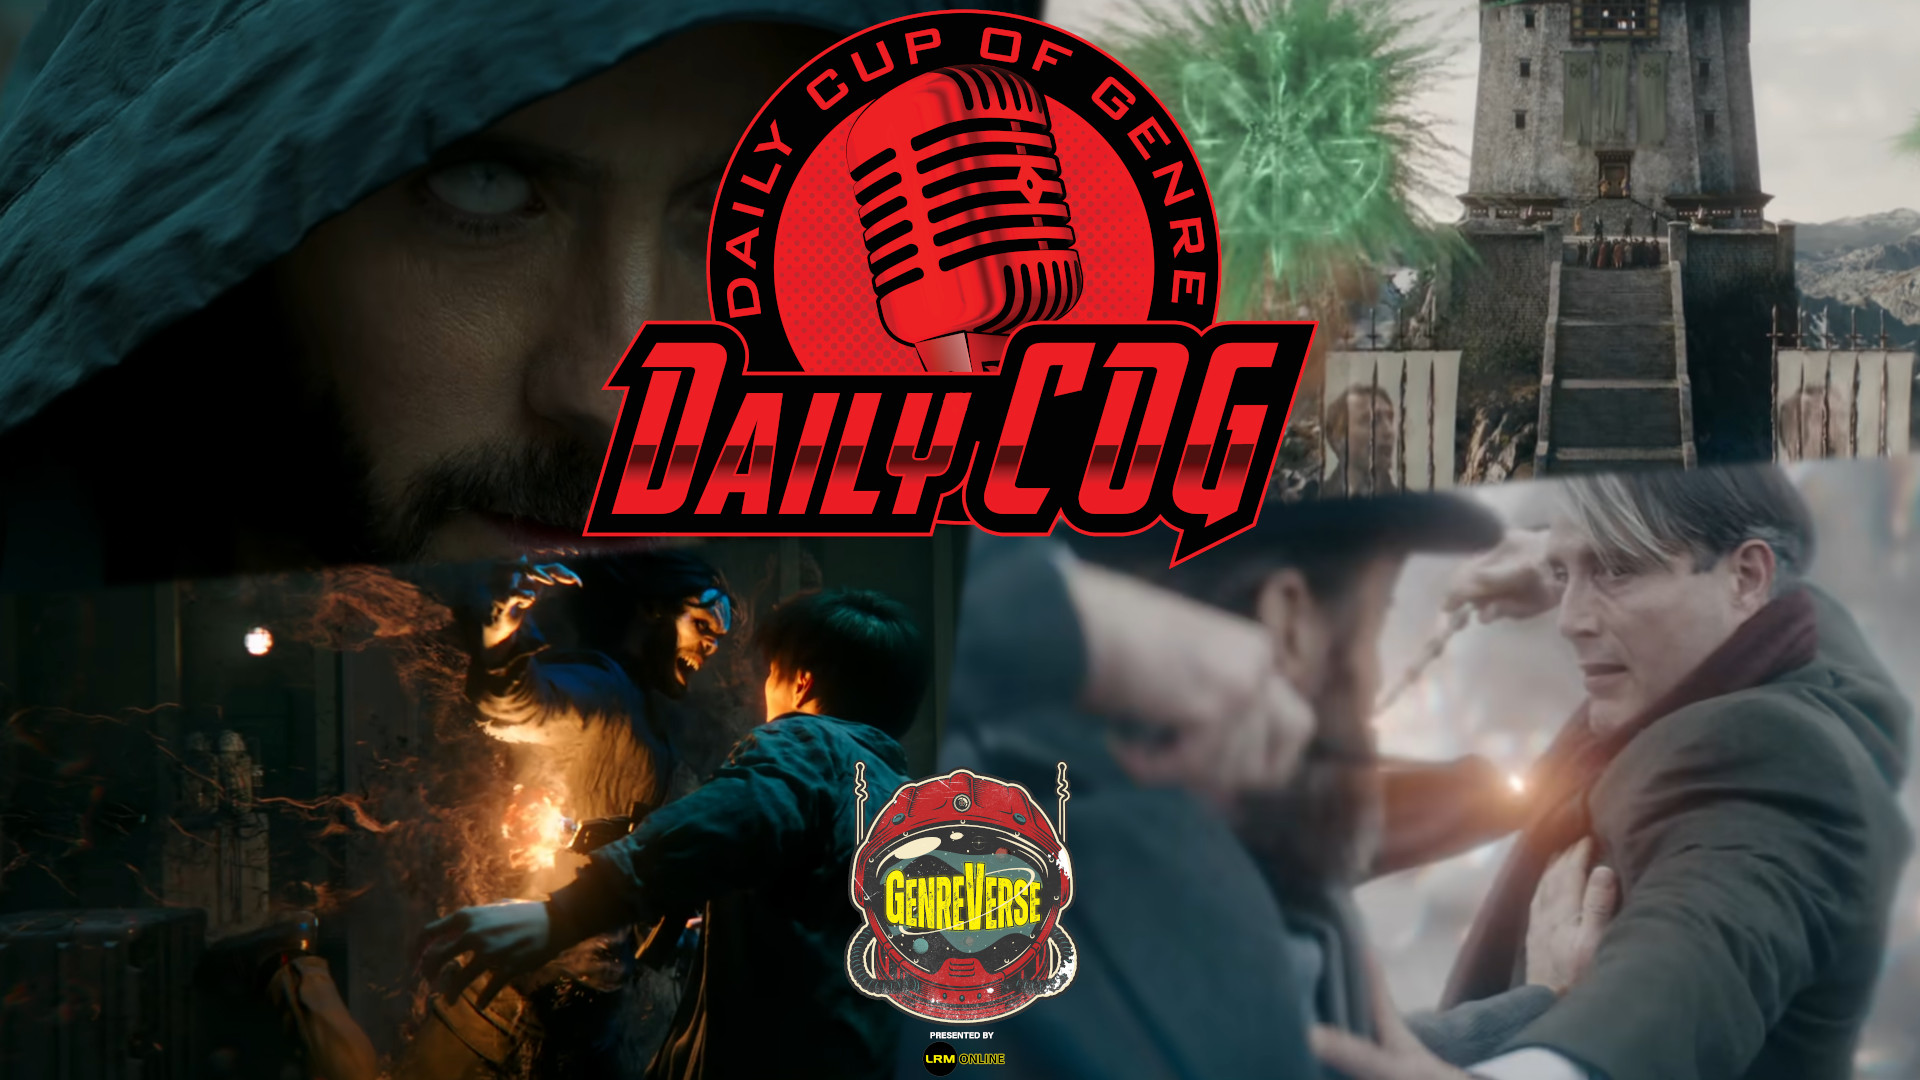 Why Are These A Thing Again? Morbius Final Trailer & Secrets Of Dumbledore Trailer 2 Reactions | Daily COG